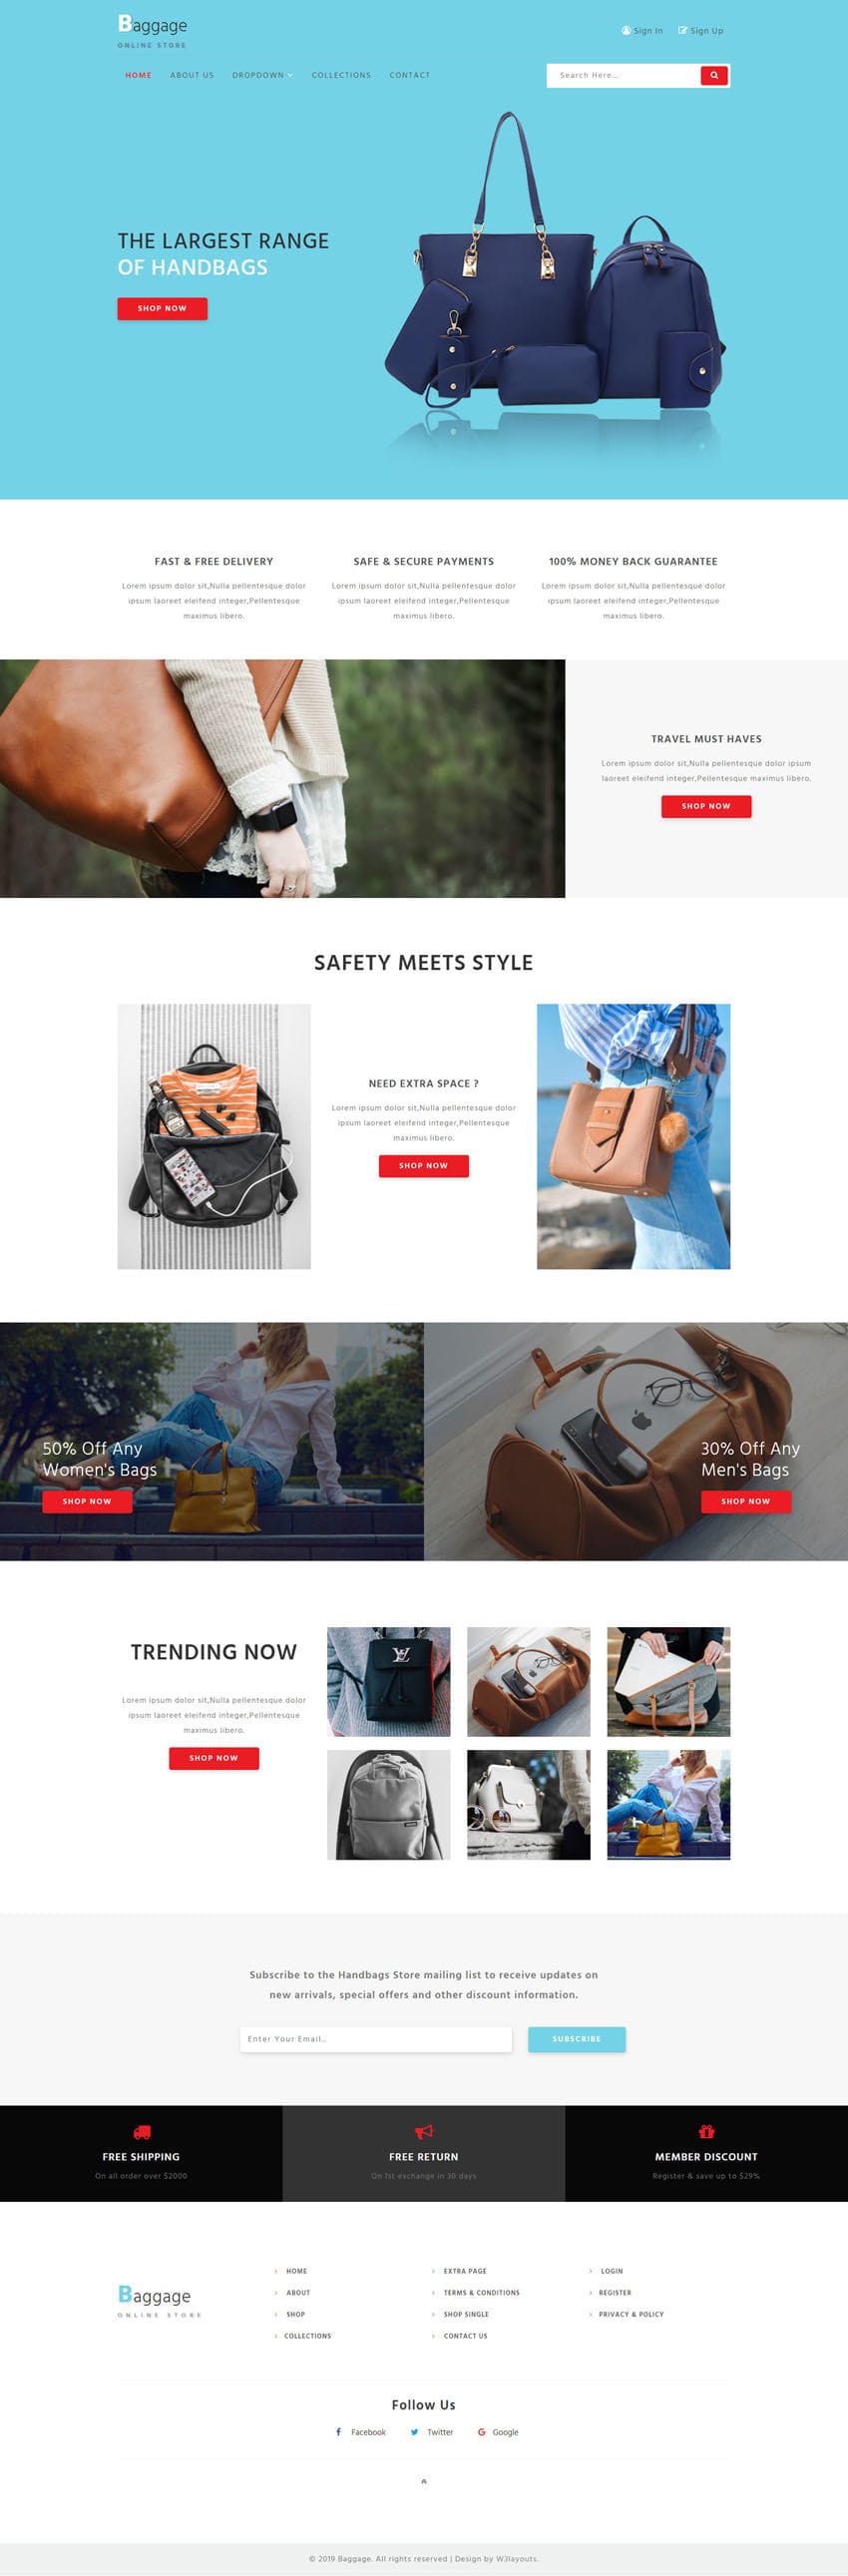 Baggage, an E-commerce category website template designed for online stores selling luxury bags.